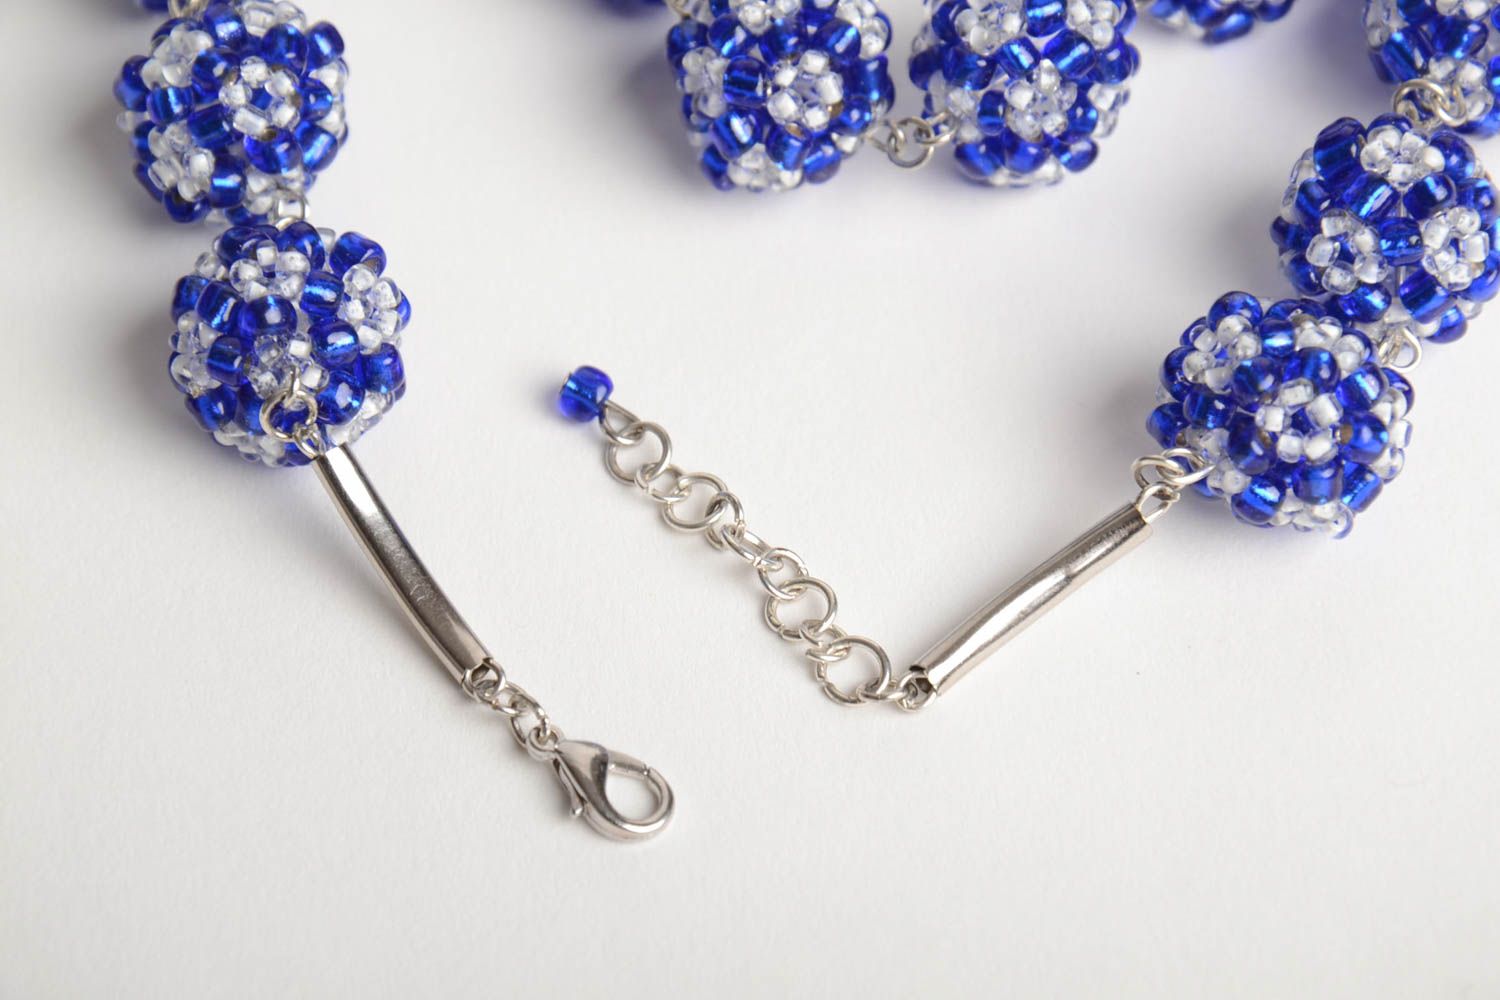 Handmade designer women's necklace with balls crocheted of blue and white beads photo 4